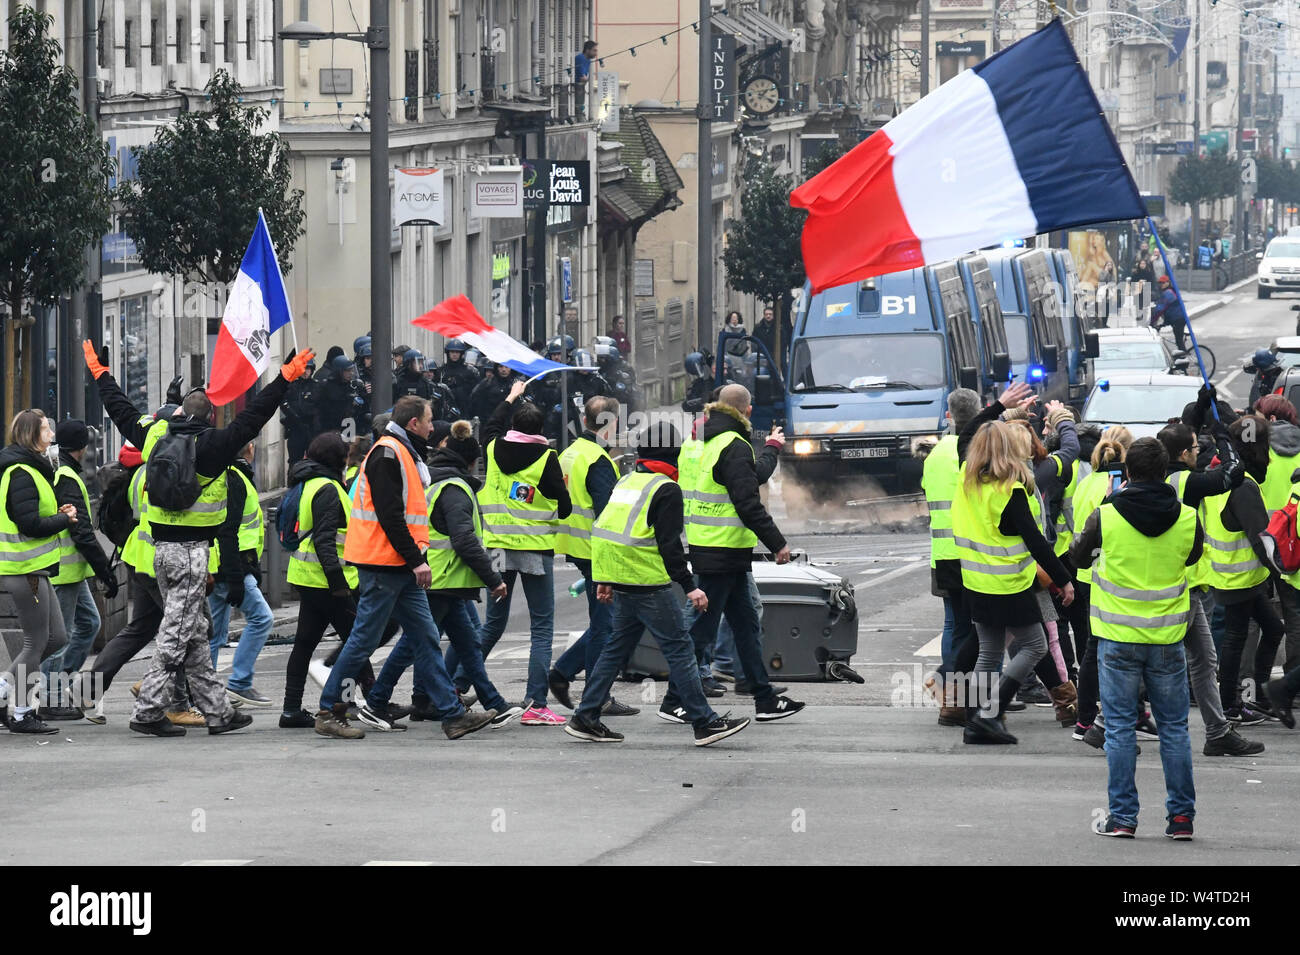 Rouen (Normandy, northern France): 7th demonstration of “Gilets jaunes” (Yellow Vests) social protesters on 2018/12/29 Stock Photo